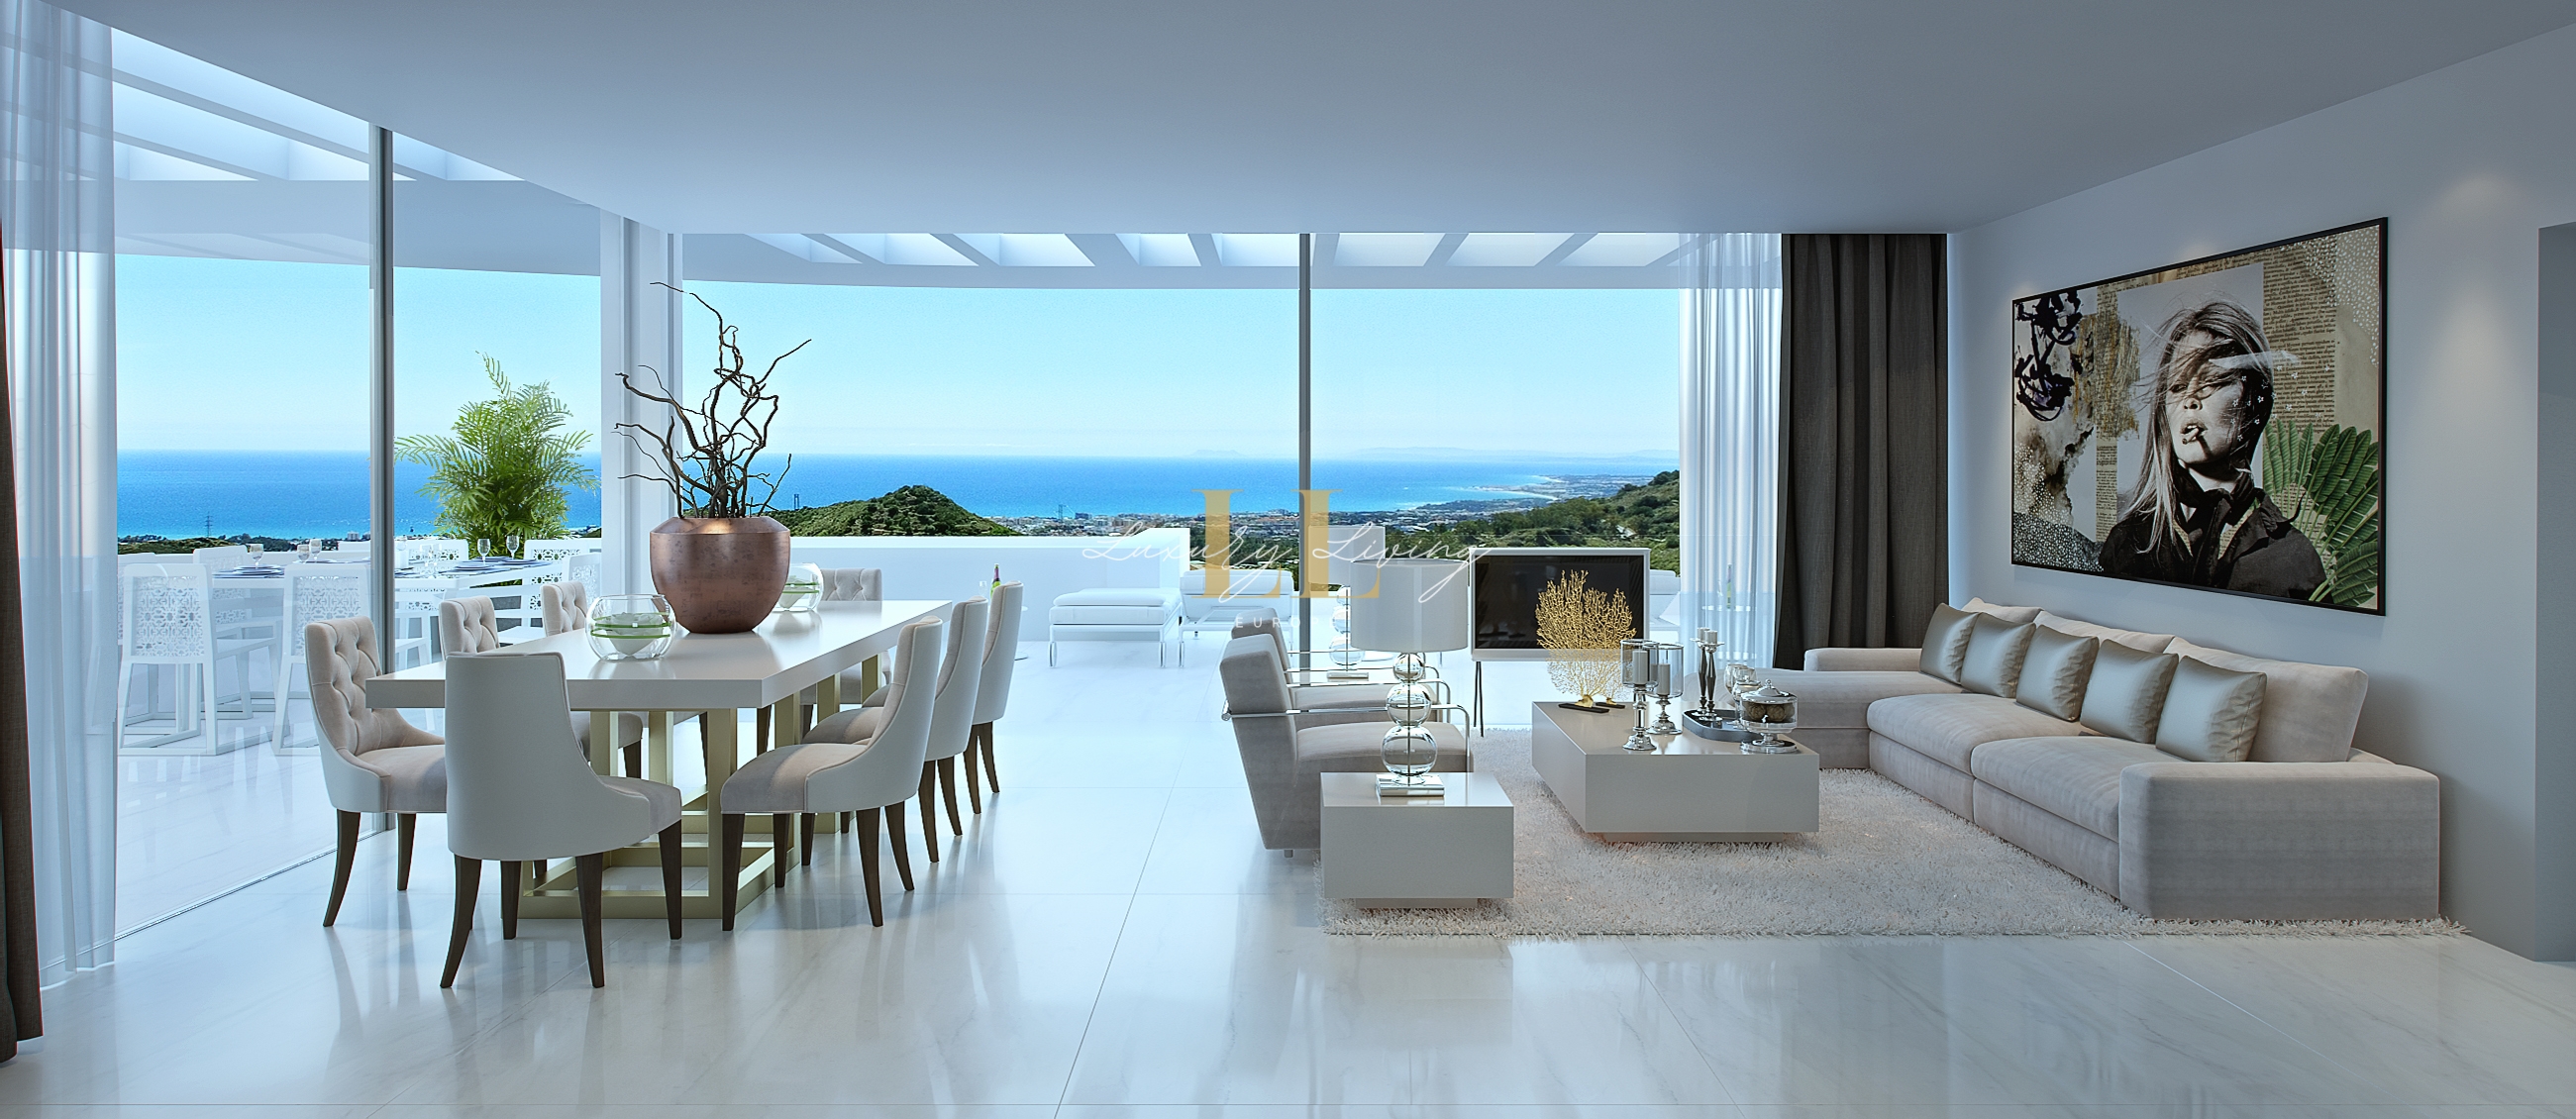 Cuervo Penthouse Accommodation in Marbella